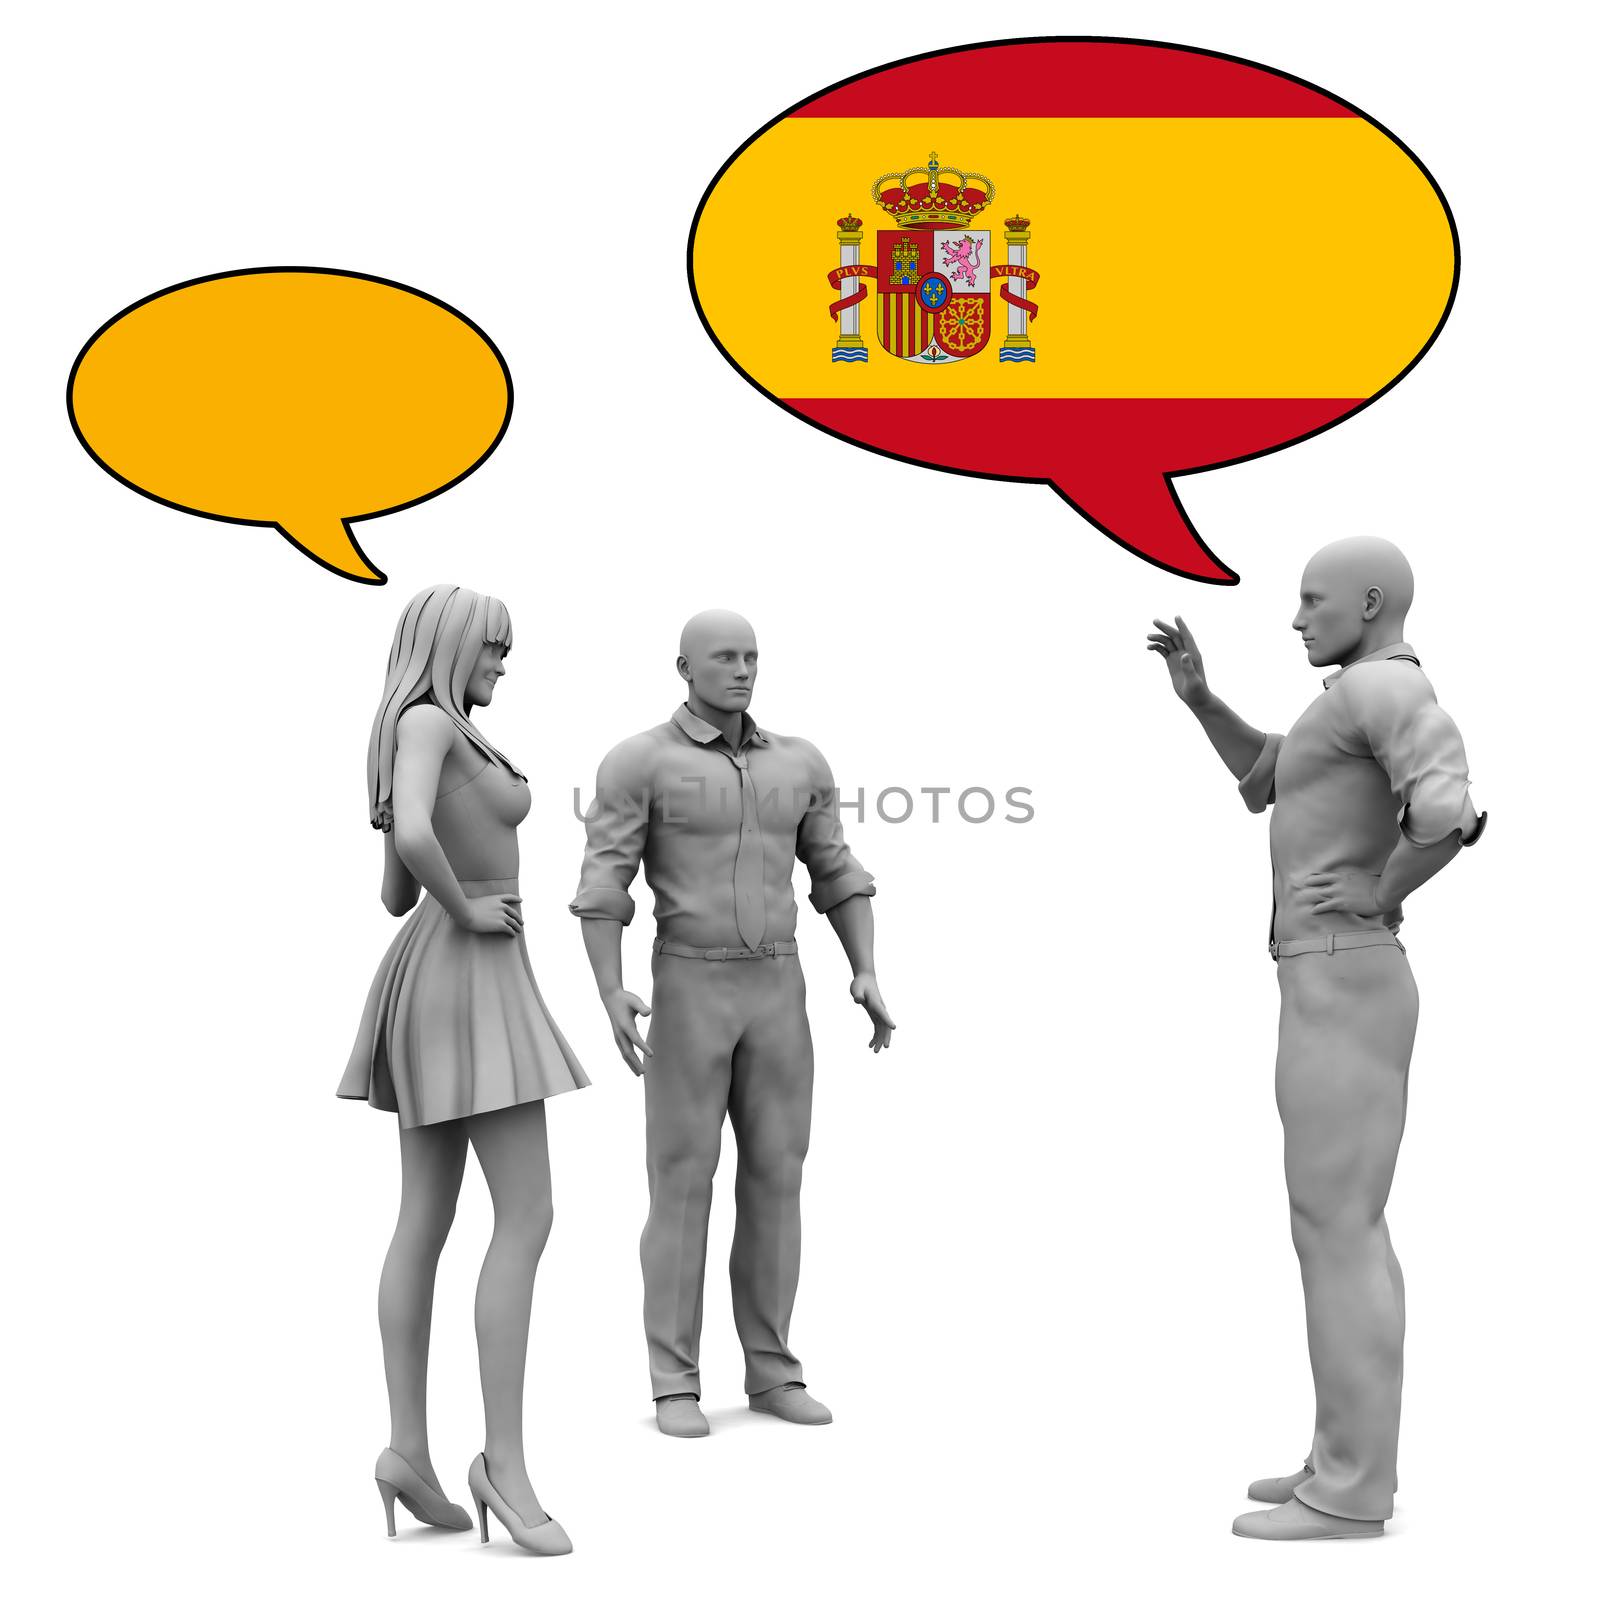 Learn Spanish Culture and Language to Communicate